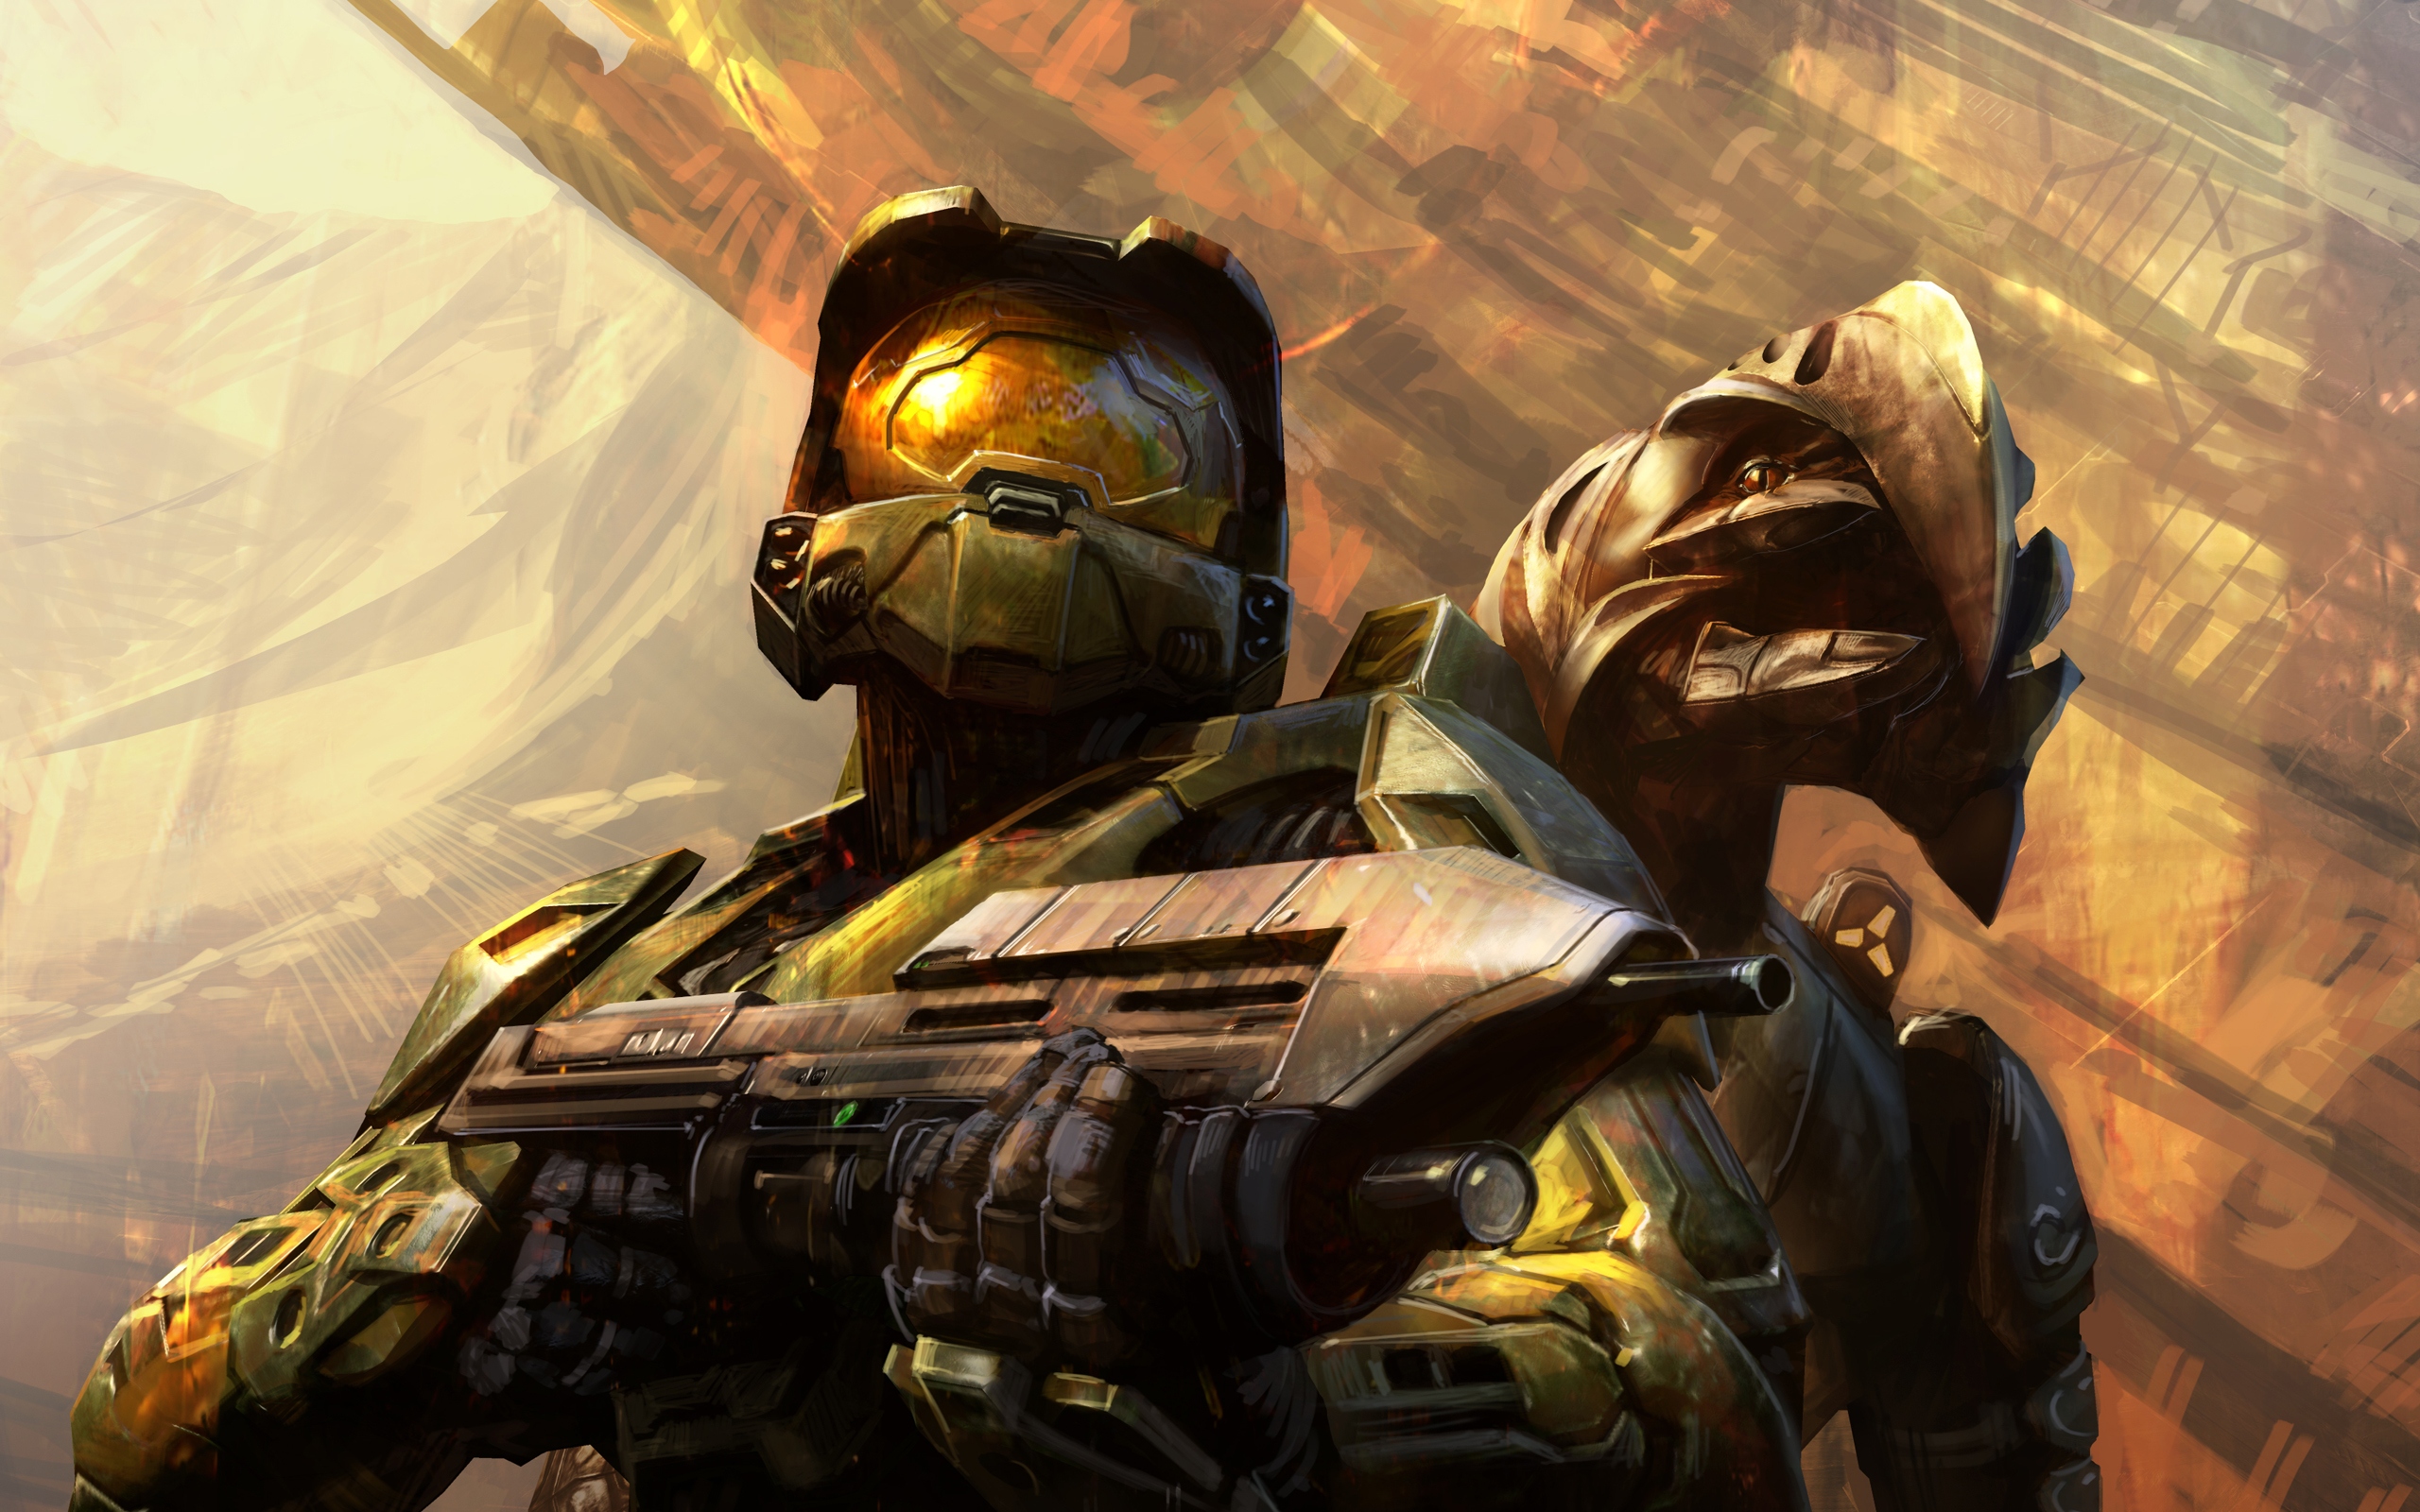 Video Game Halo 3 HD Wallpaper | Background Image